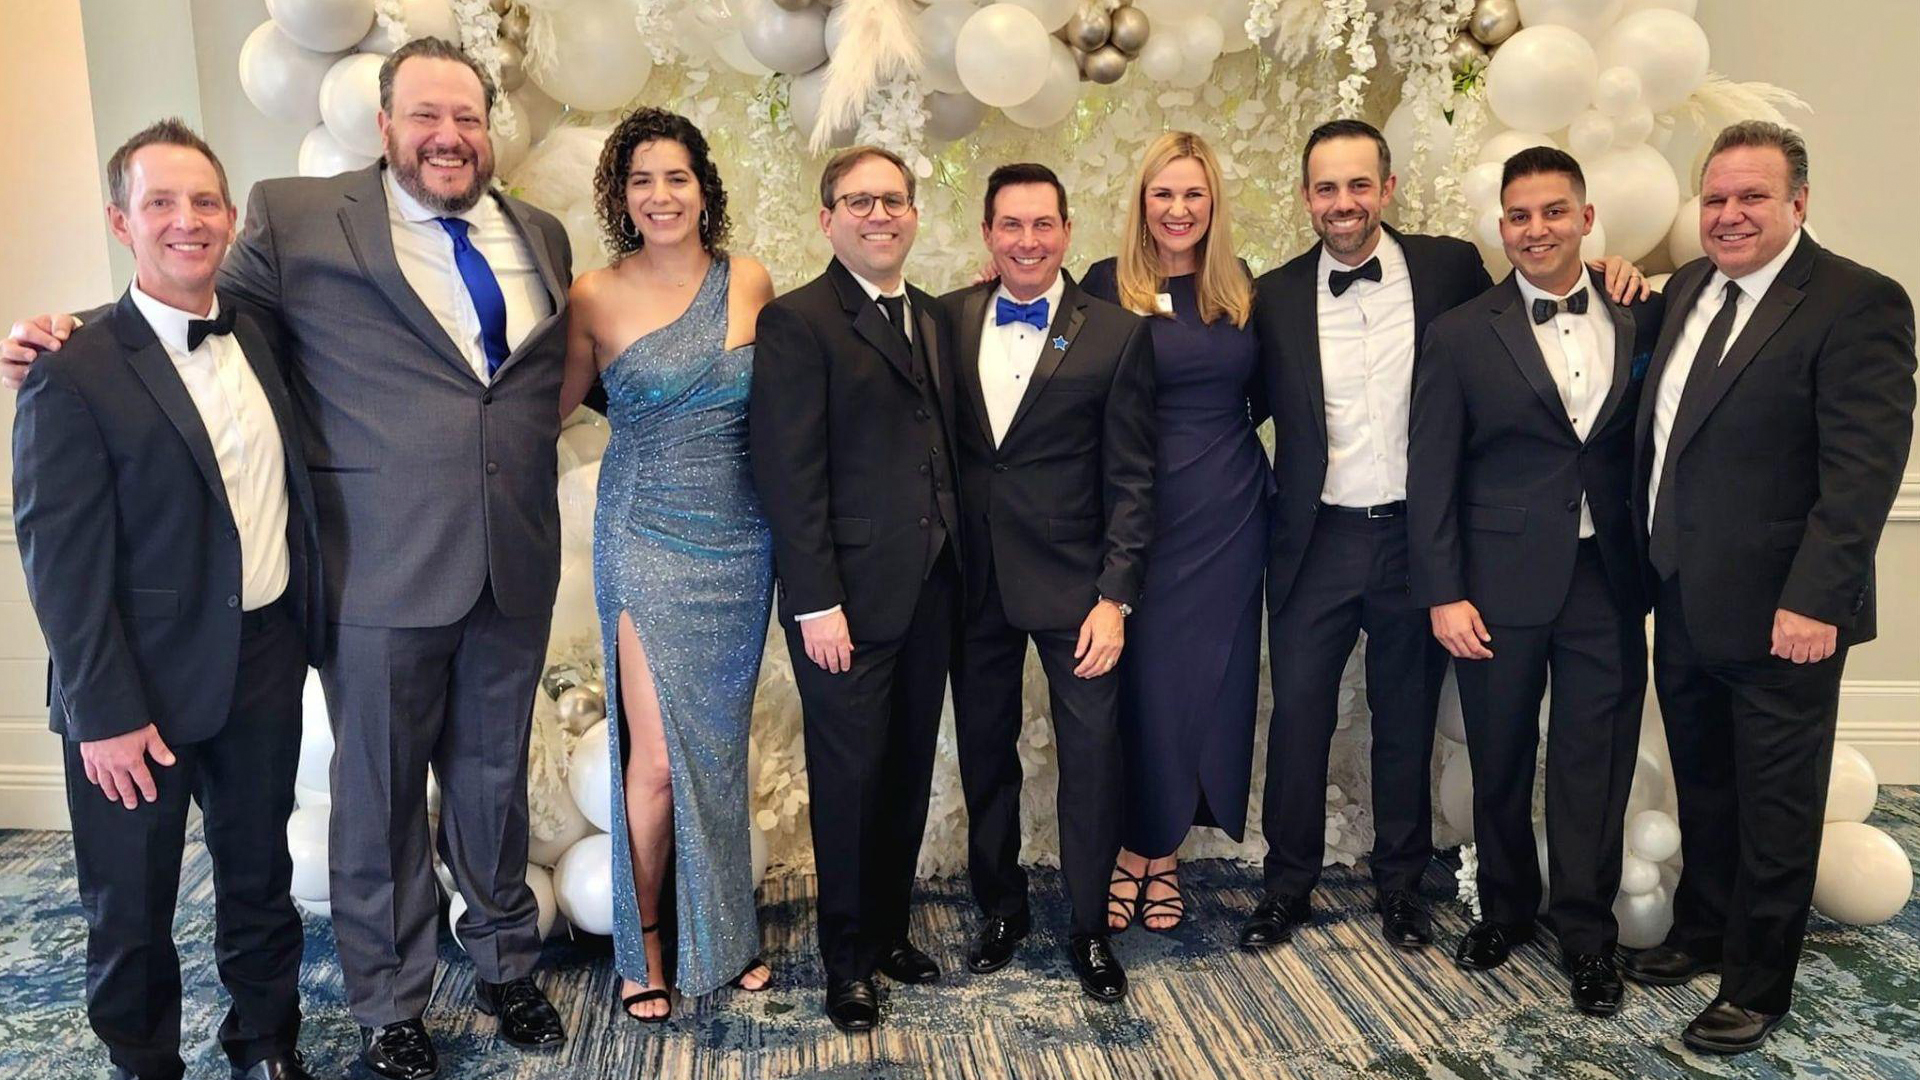 Winter Park Mergers & Acquisitions firm attends the Wishmakers Ball in Orlando Florida